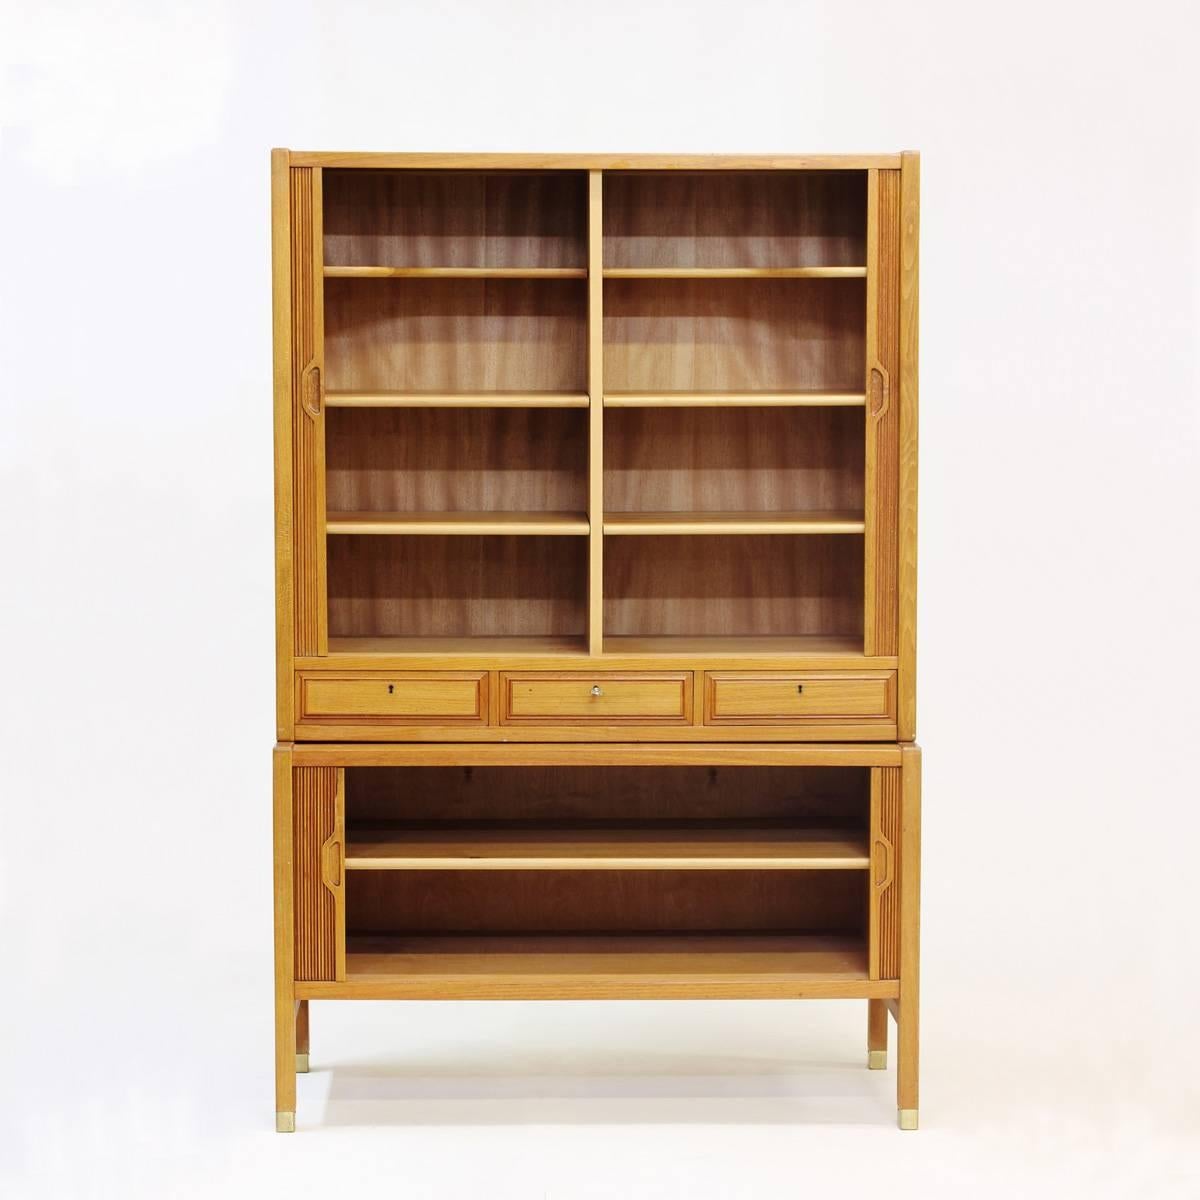 Mid-20th Century Oak and Teak Cabinet by Carl-Axel Acking